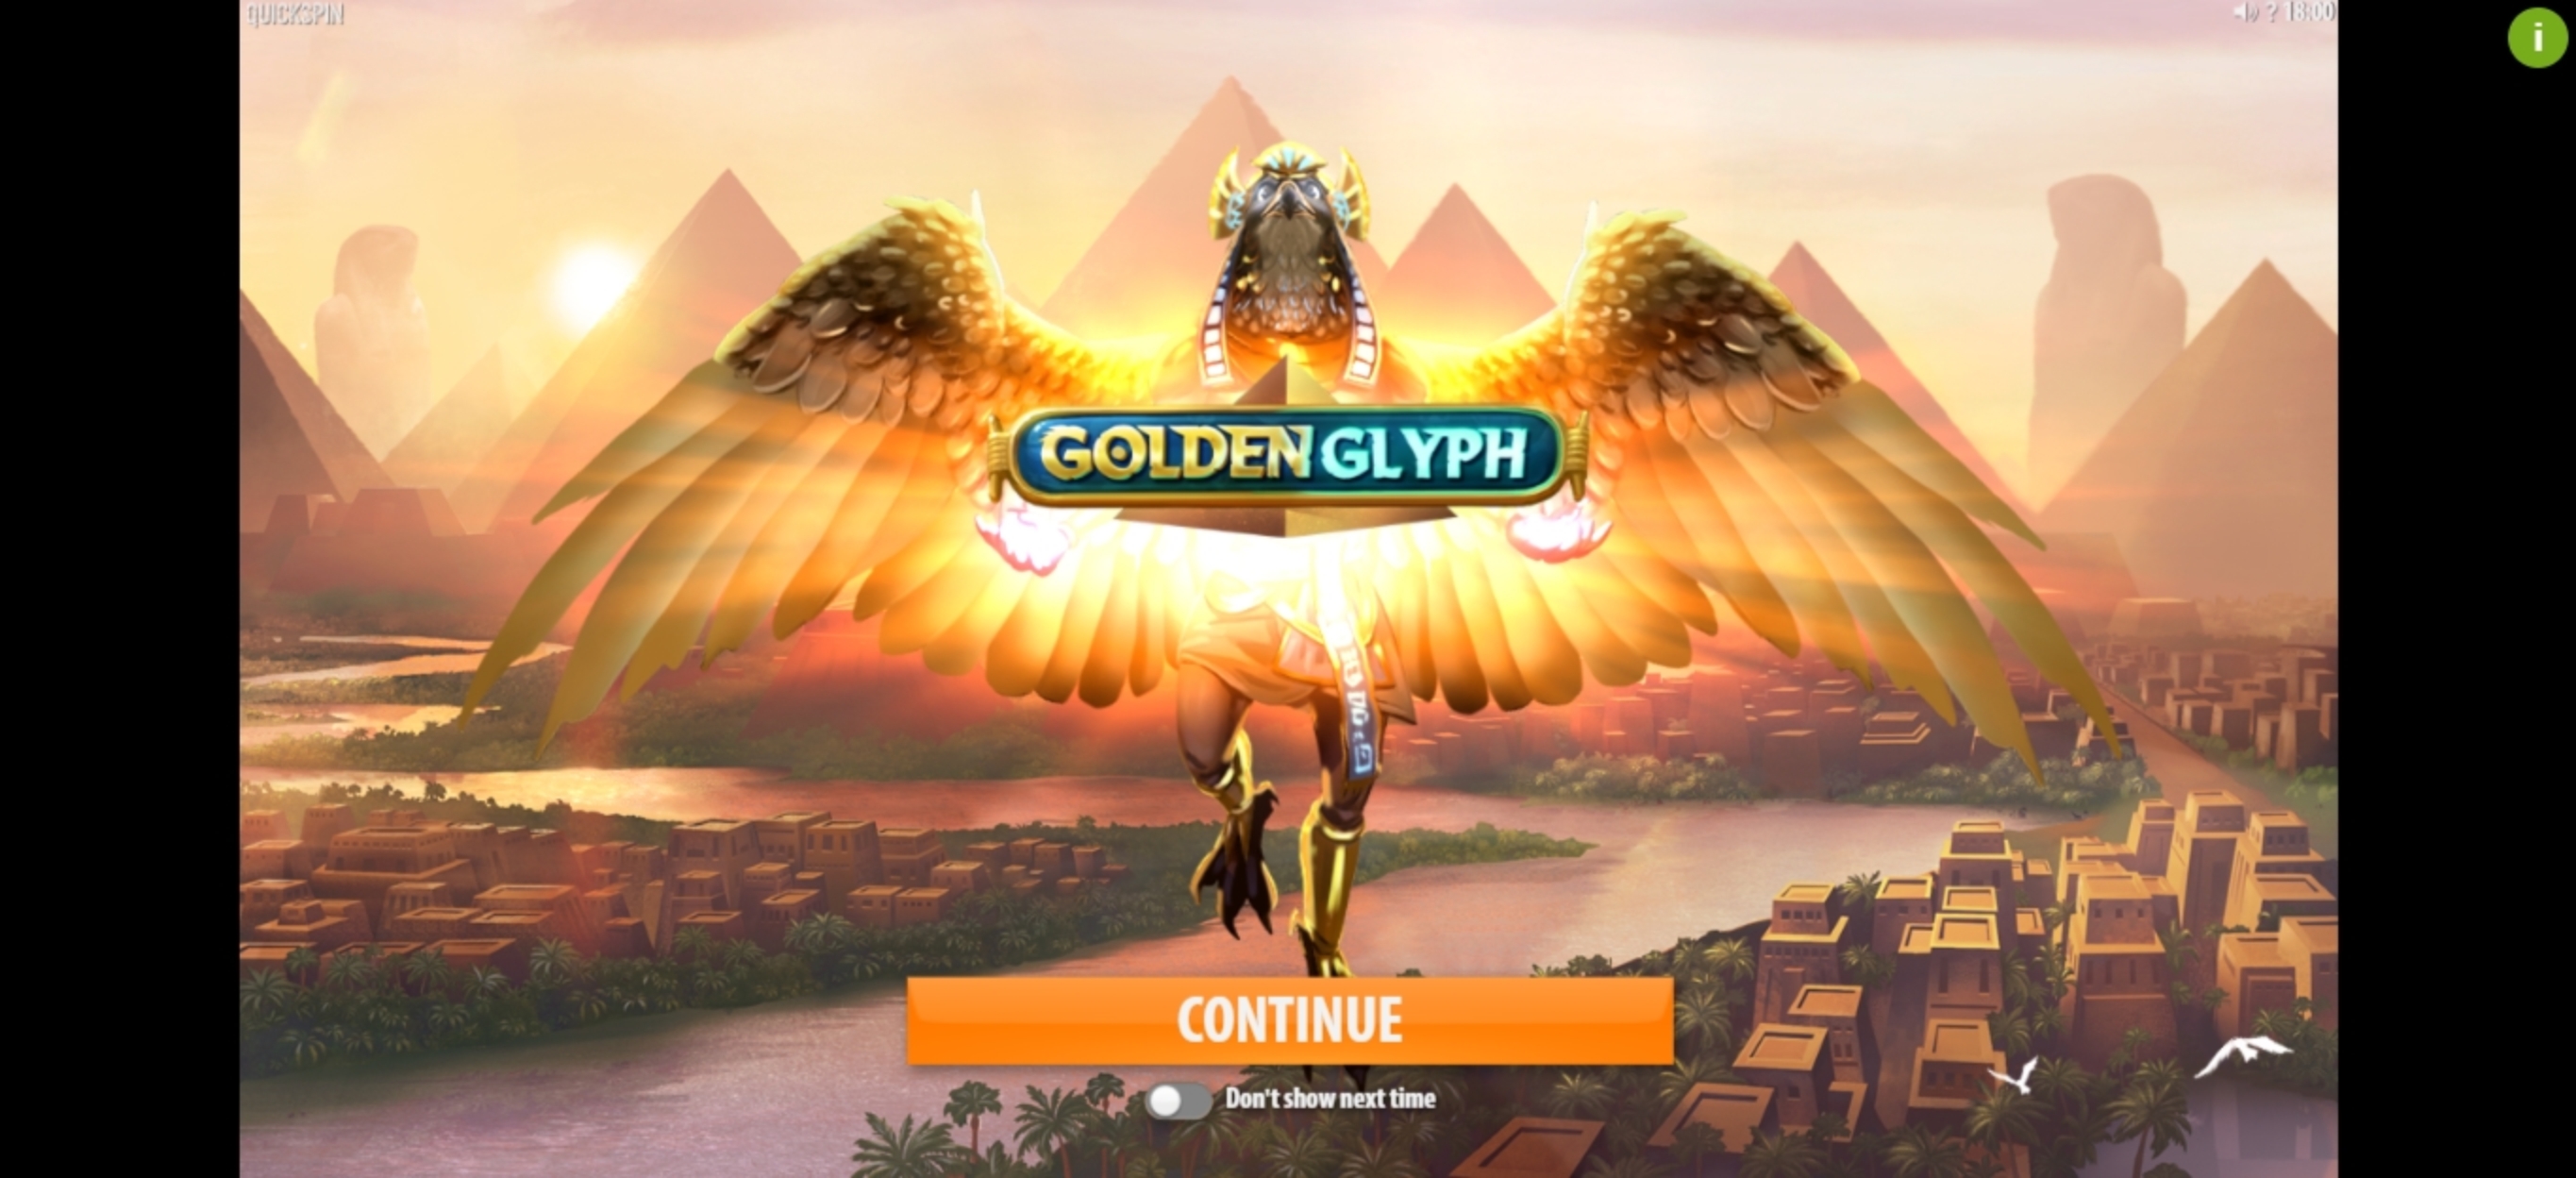 Play Golden Glyph Free Casino Slot Game by Quickspin